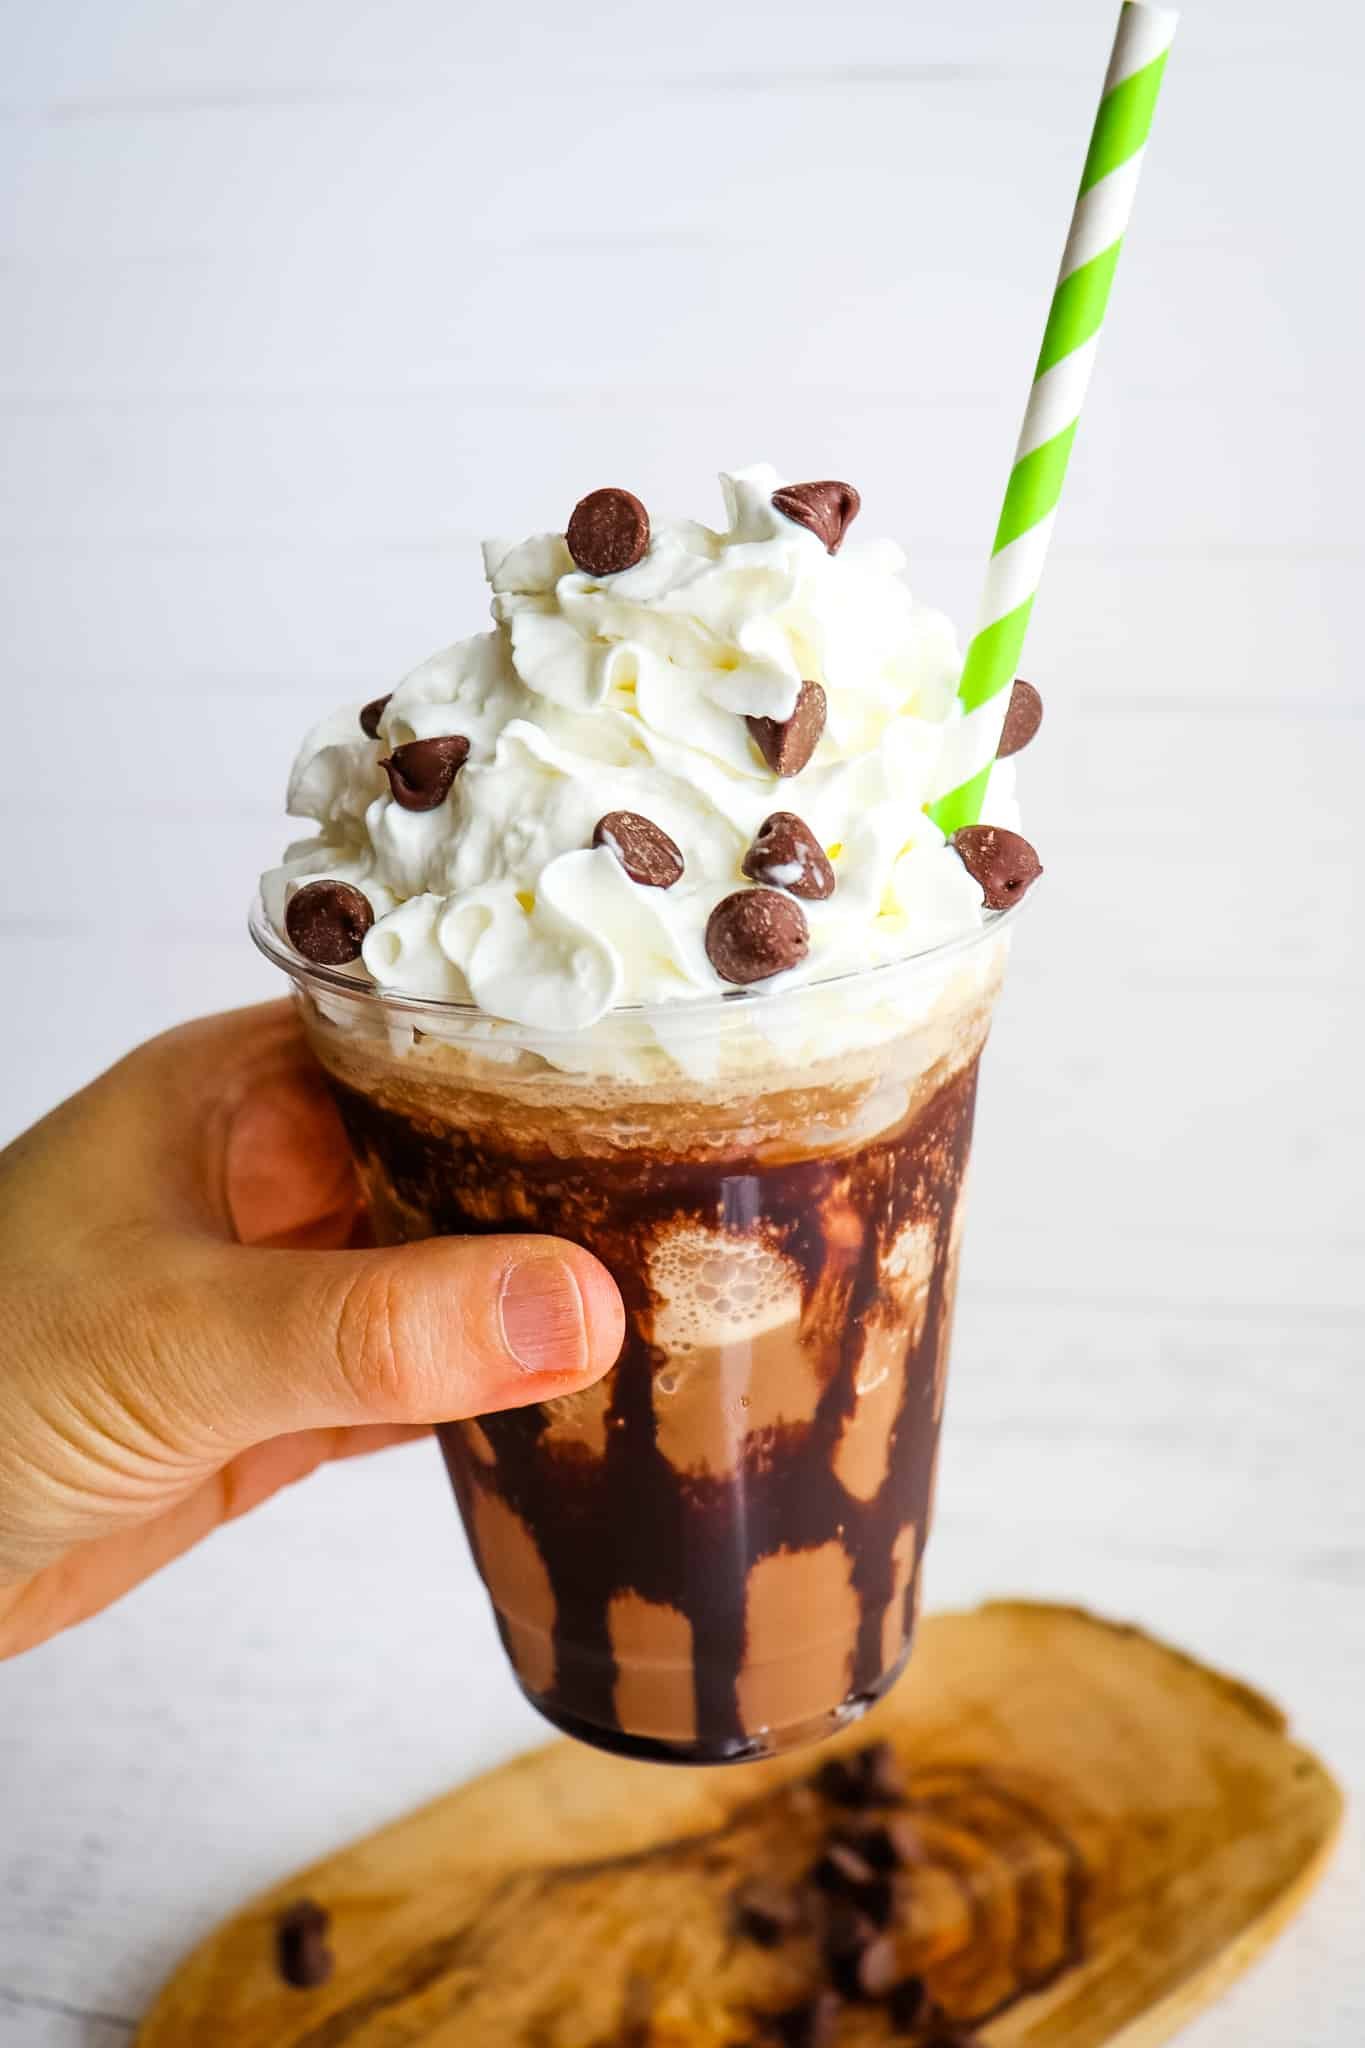 Starbucks Mocha Frappuccino with straw, held in hand.